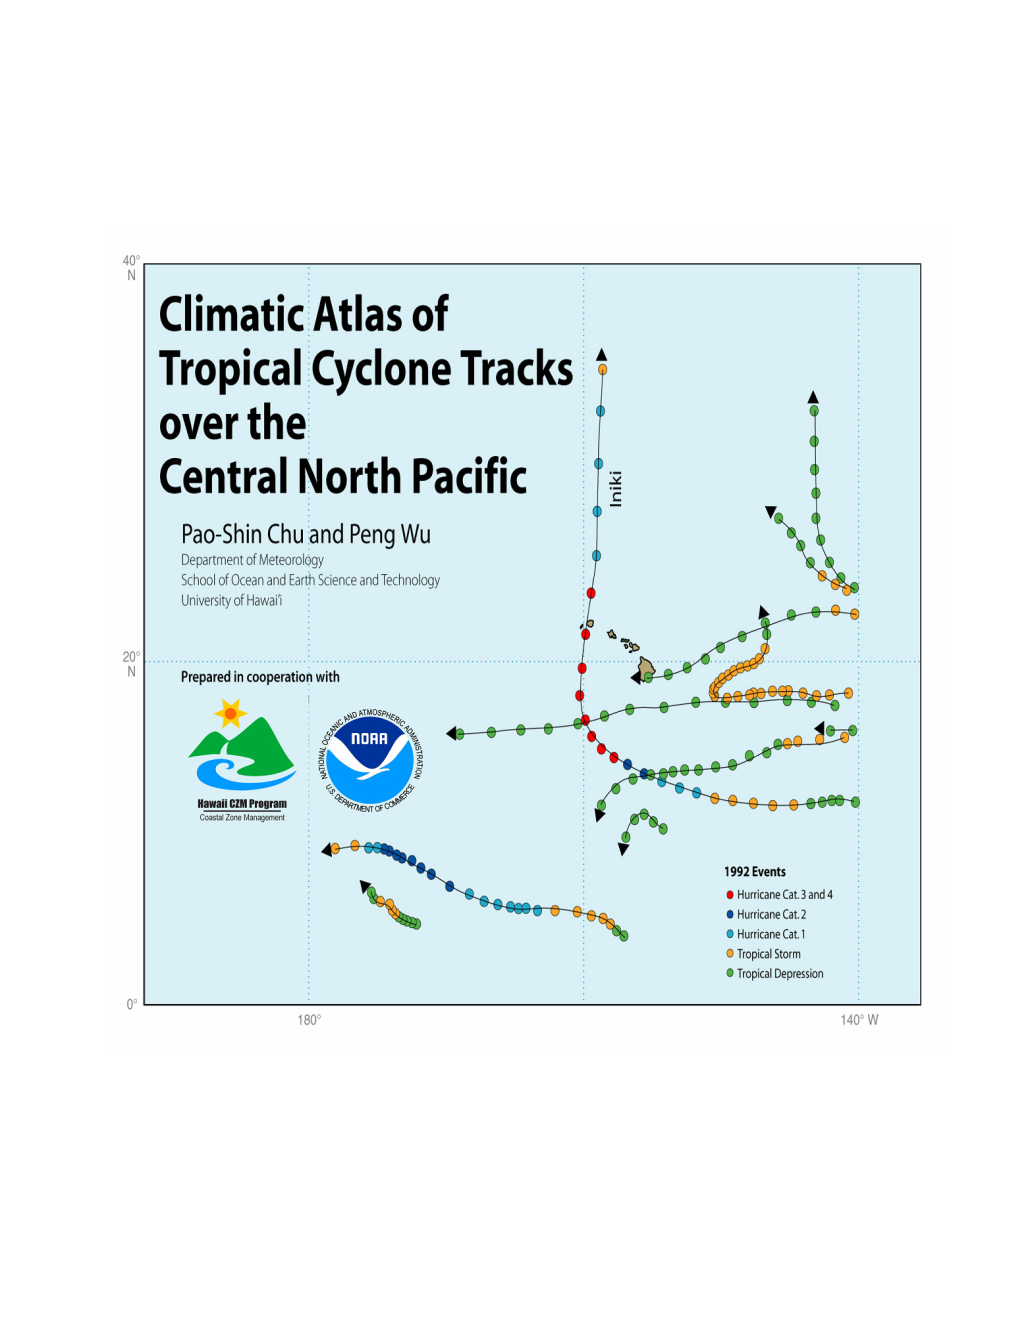 Climatic Atlas of Tropical Cyclone Tracks Over the Central North Pacific